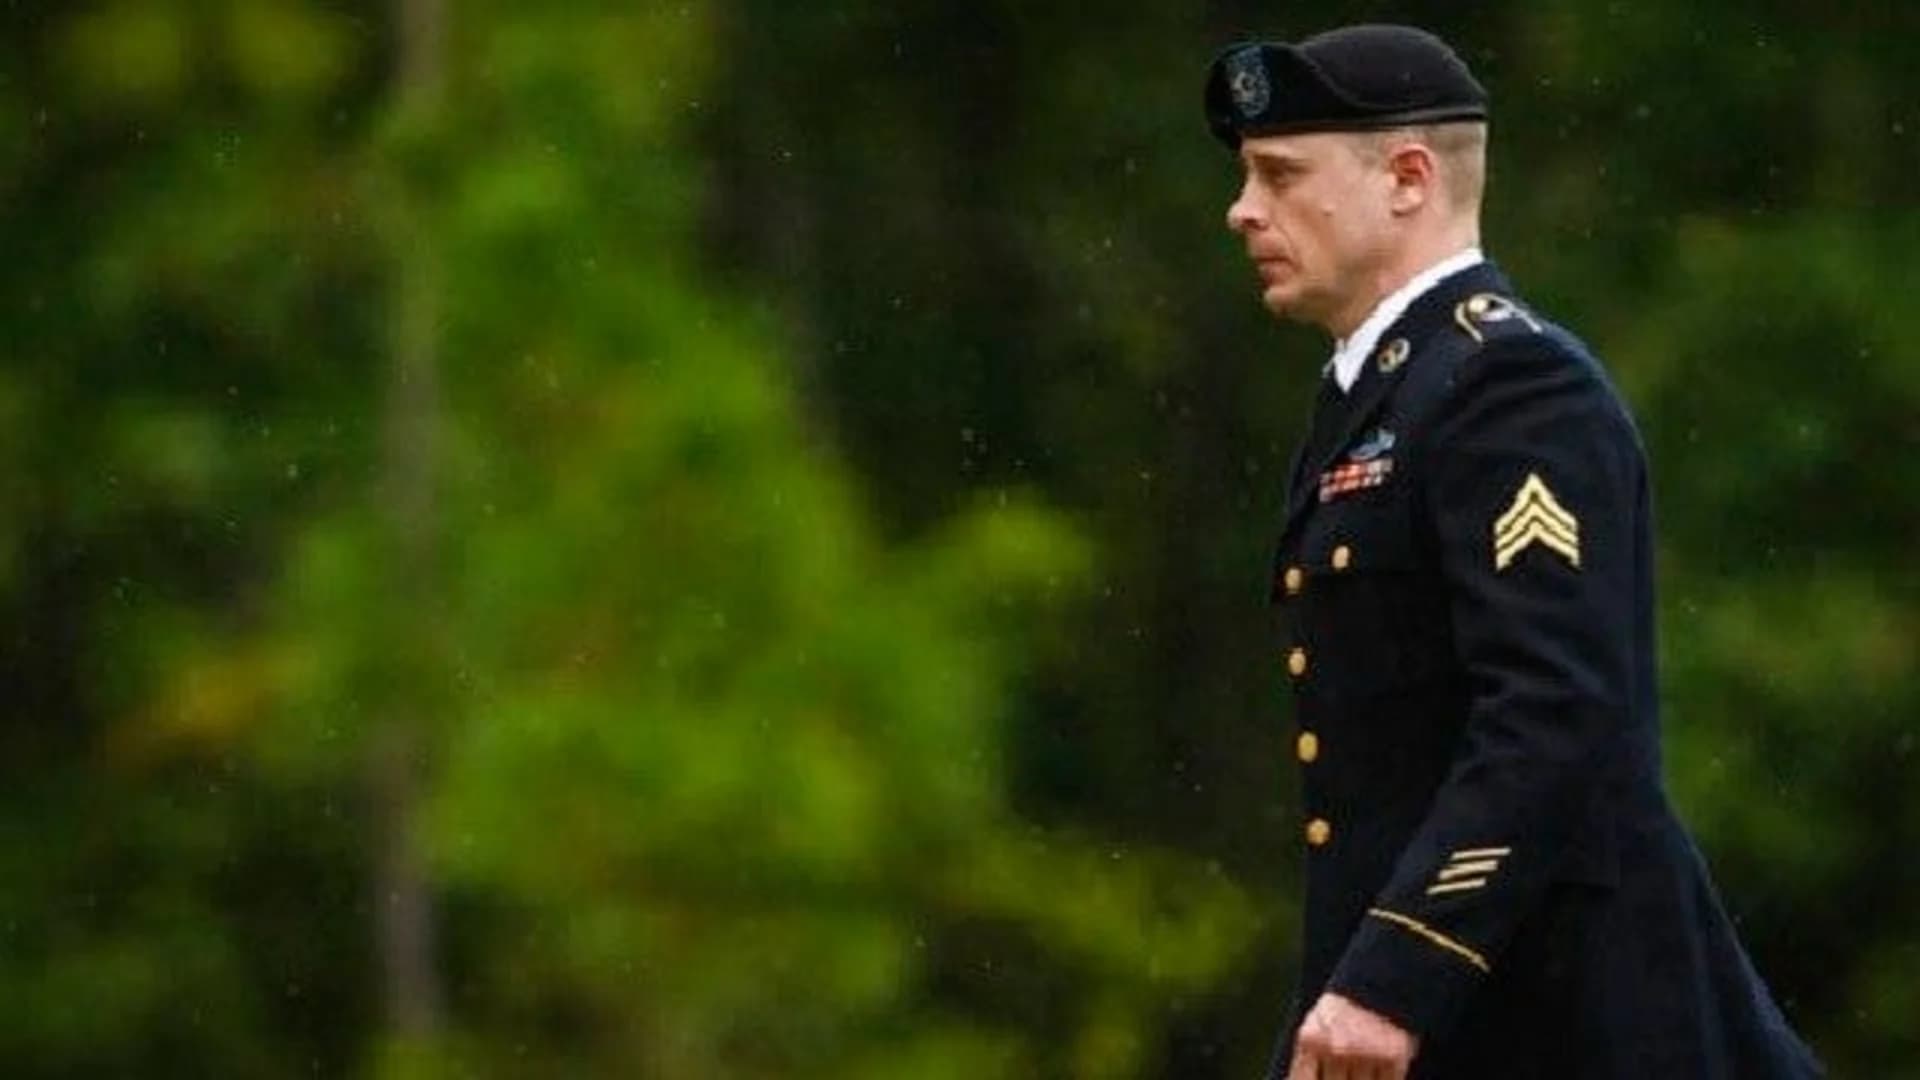 Troops describe hardships, wounds during Bergdahl searches